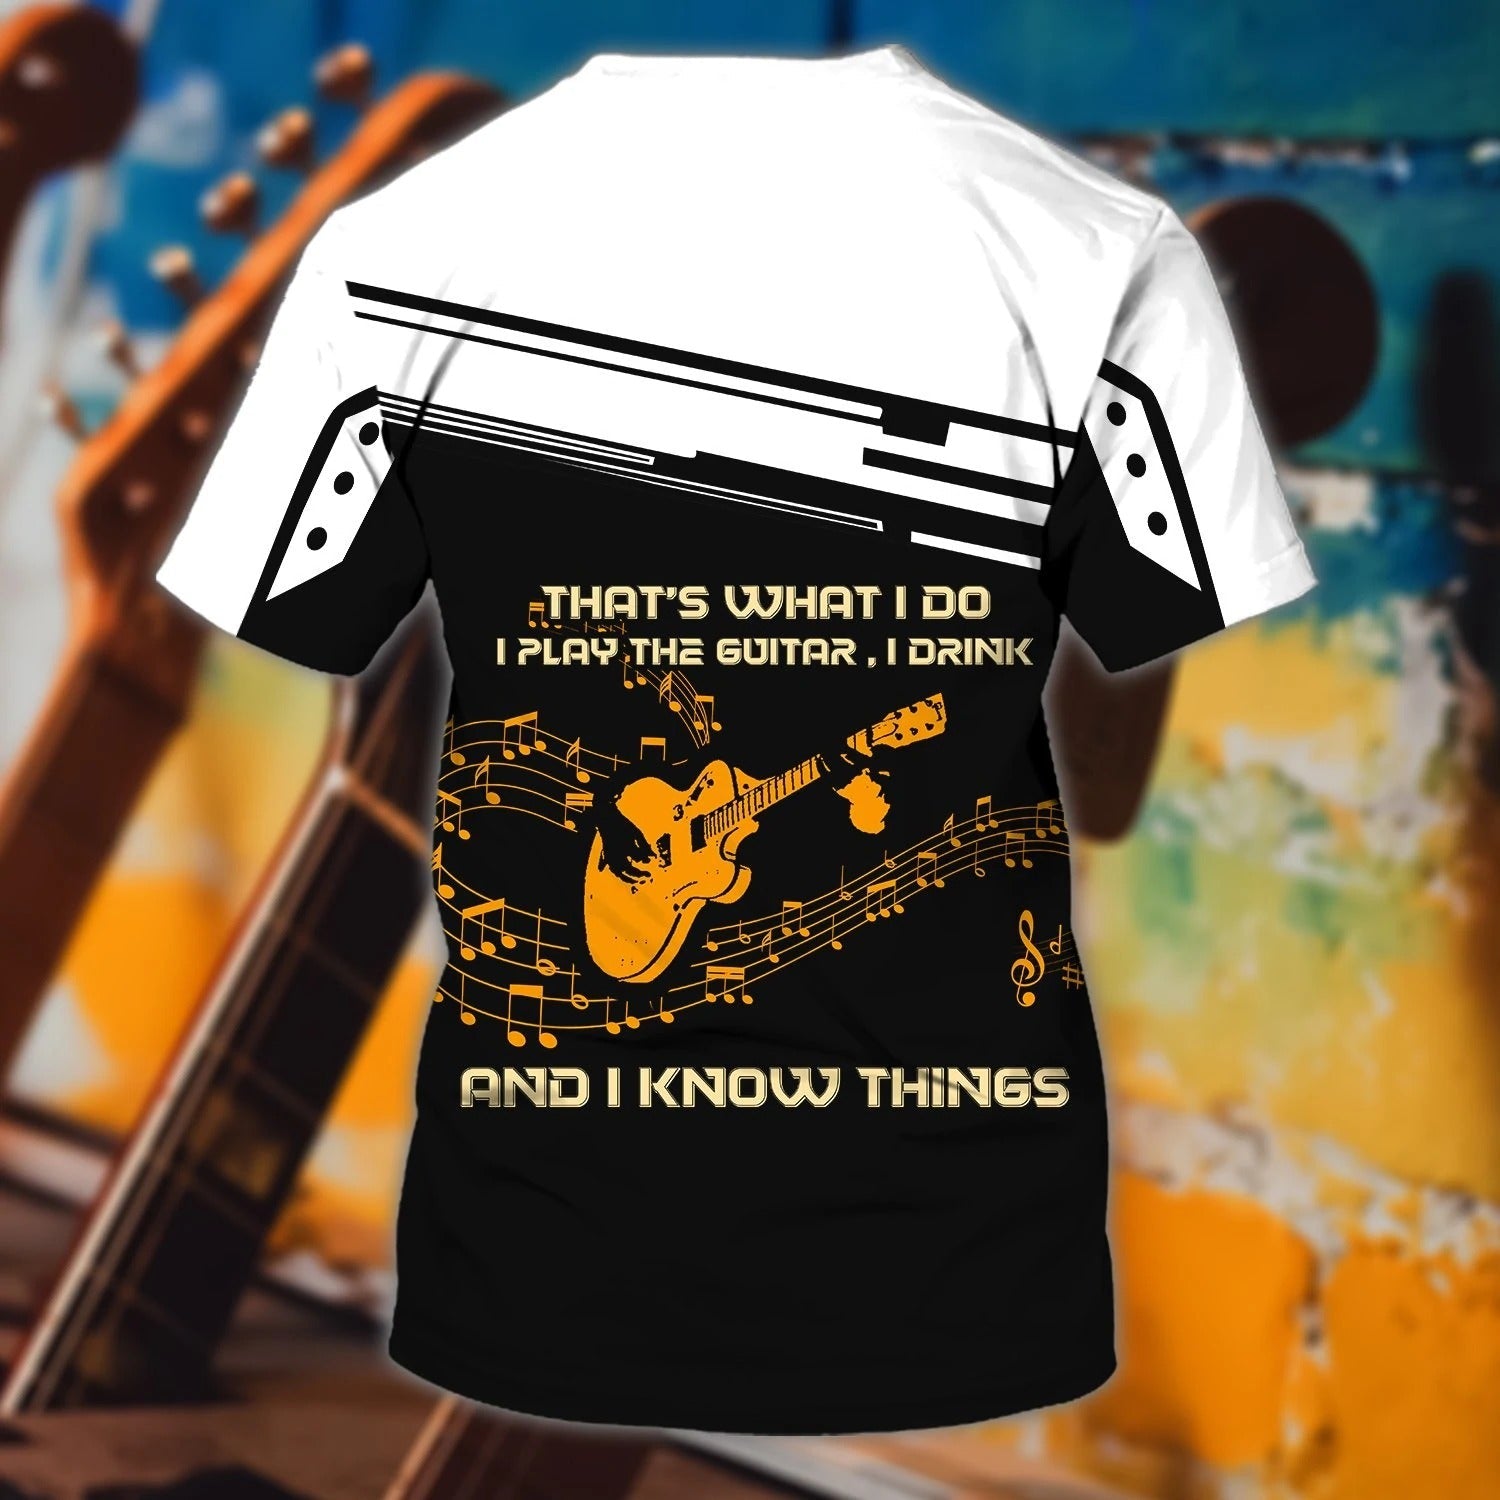 Personalized 3D Electric Guitar Shirts For Man And Woman/ Guitar Lovers Gifts/ Sublimation Shirt For Guitar Men